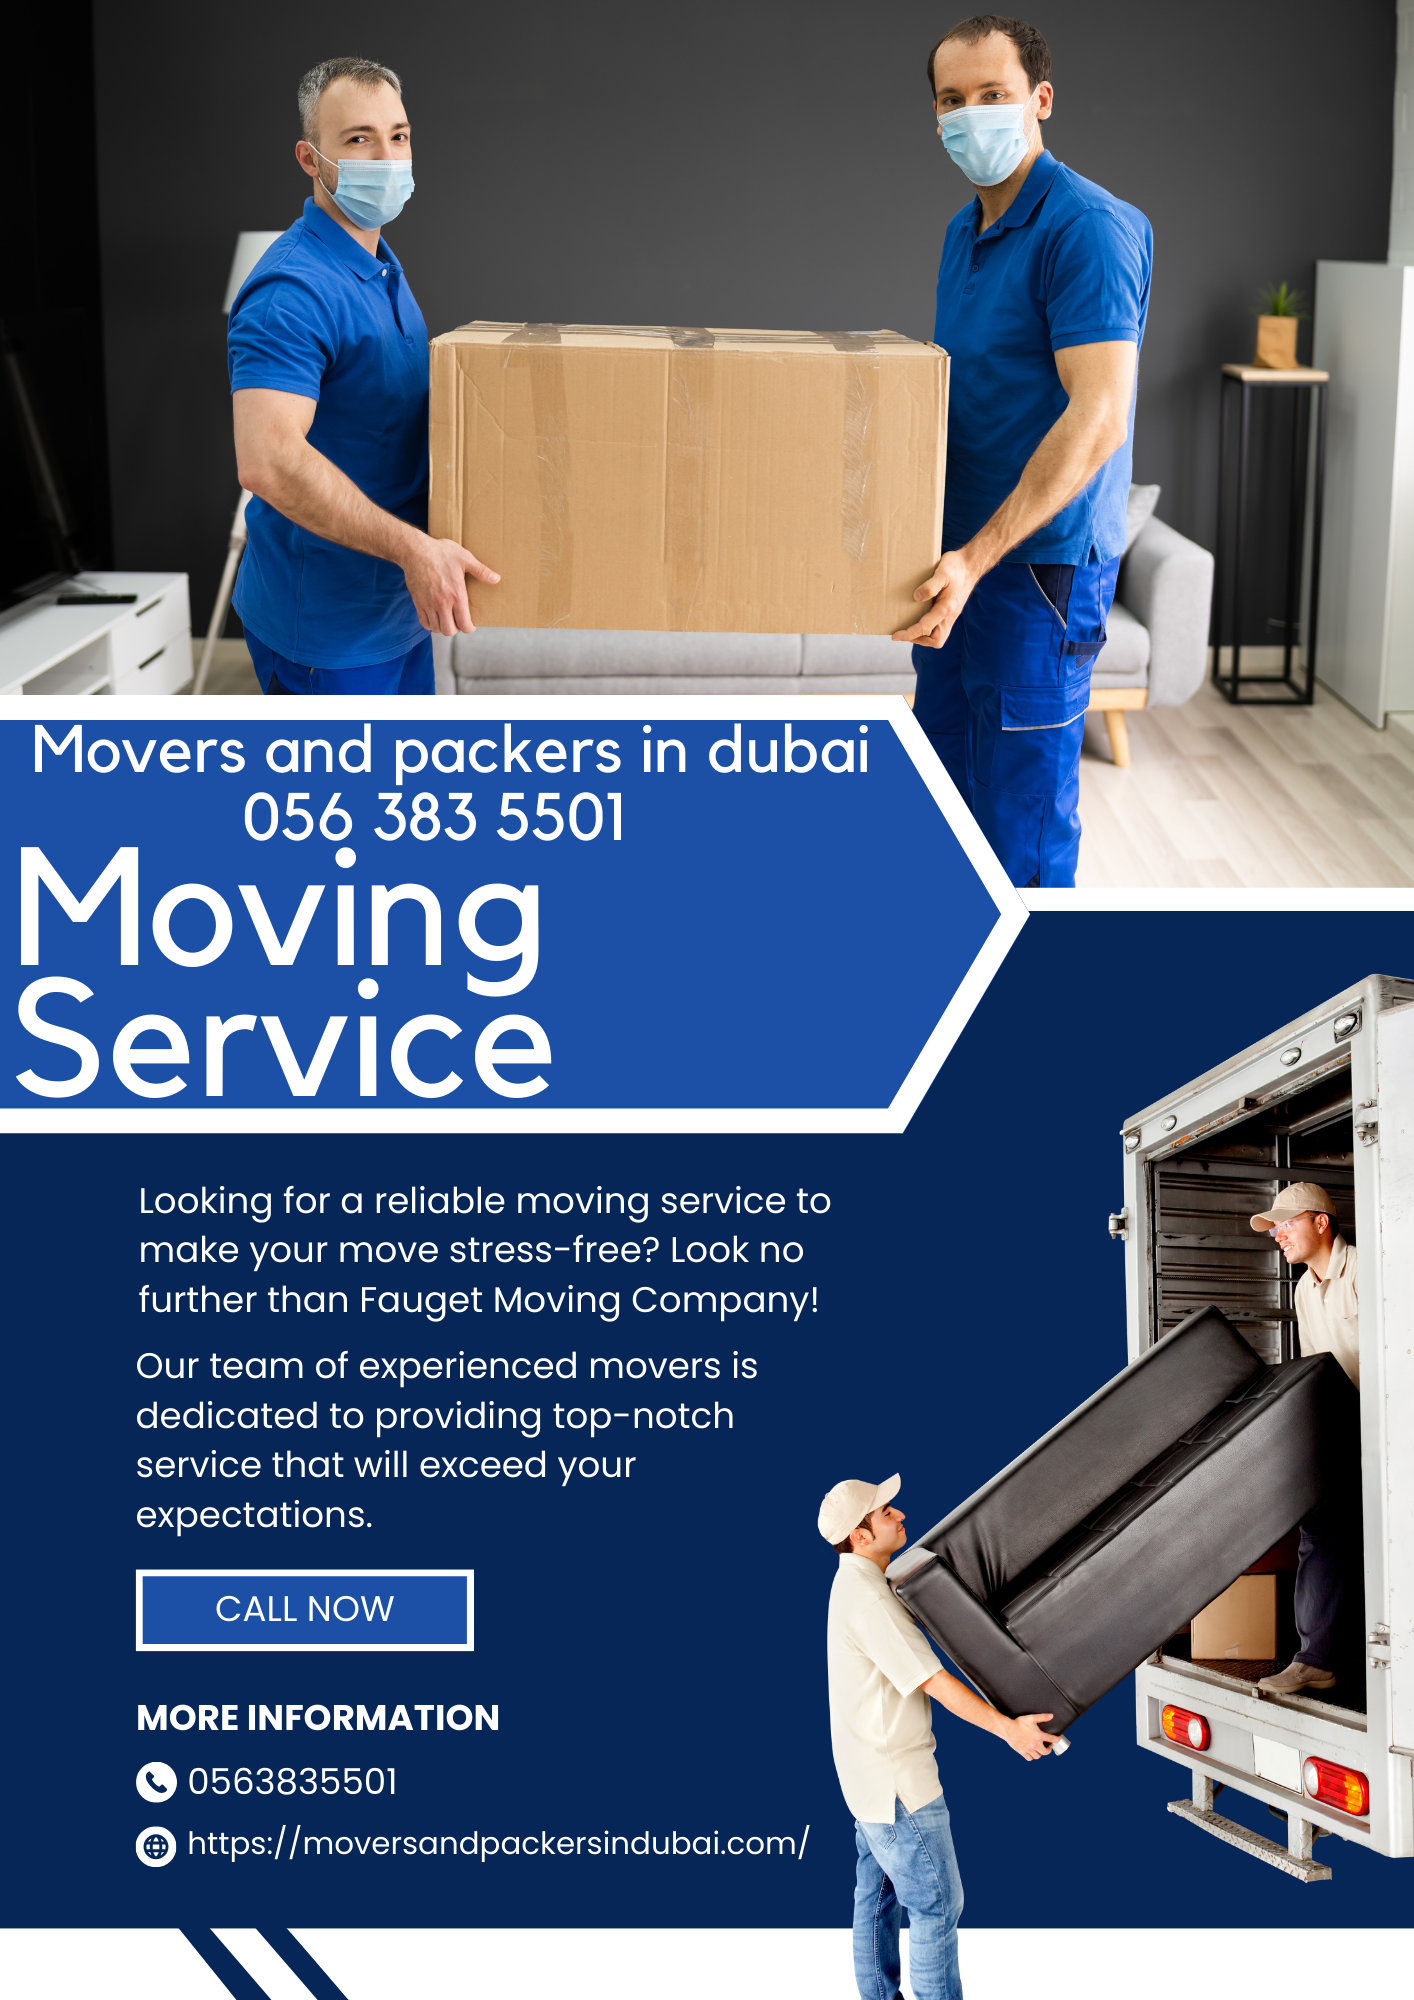 Dubai movers and packers and removals